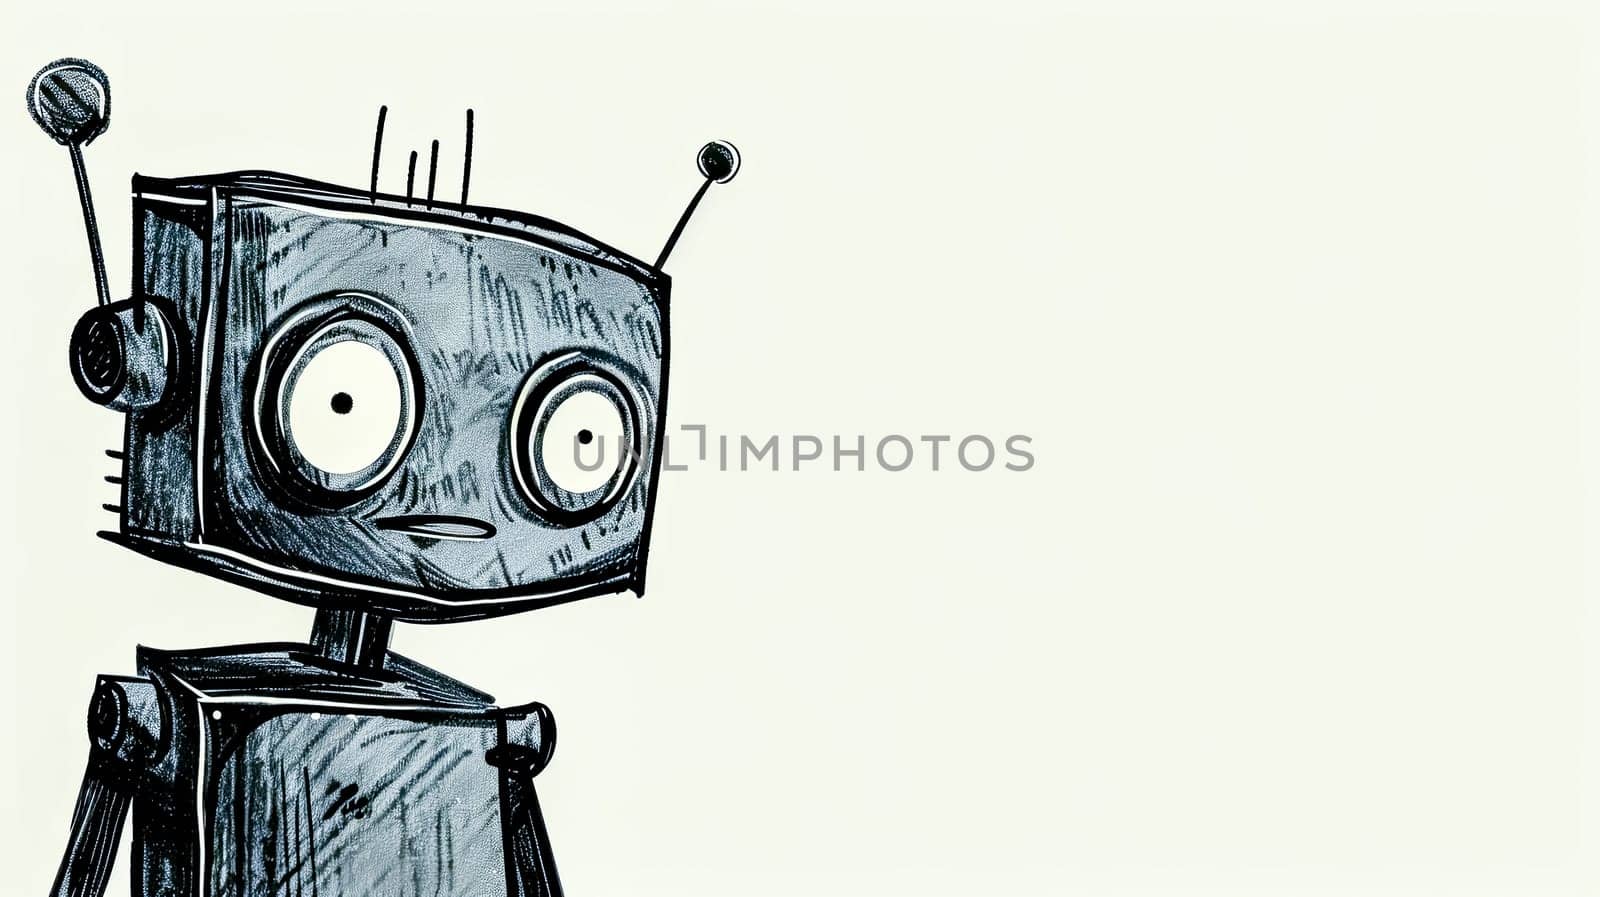 quirky robot with large, expressive eyes and whimsical antennas, rendered in a monochrome, sketch-like style against a plain background, exuding a charming blend of retro futuristic vibes, copy space